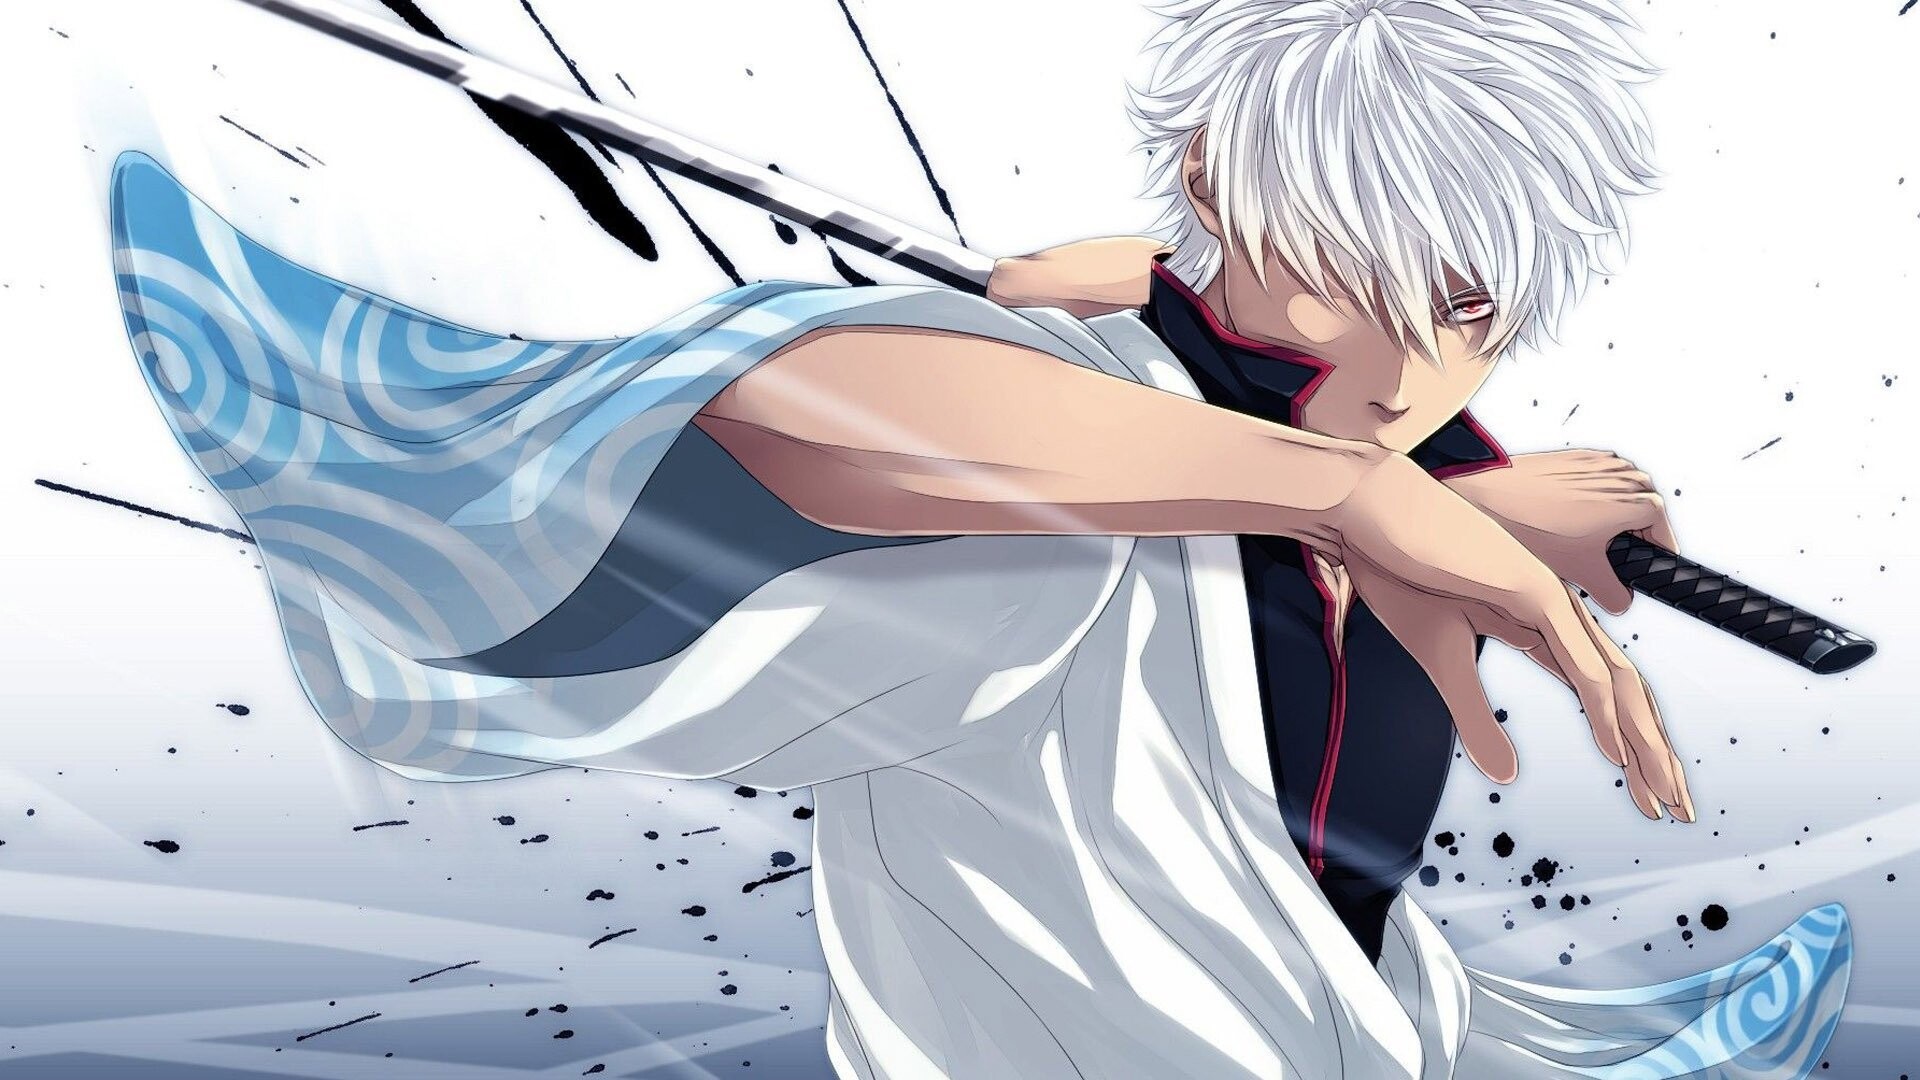 Gintama (TV Series): Gintoki's bordeaux-colored “dead fish eyes”, nearly always half-lidded, Sarcastic and unattached. 1920x1080 Full HD Background.